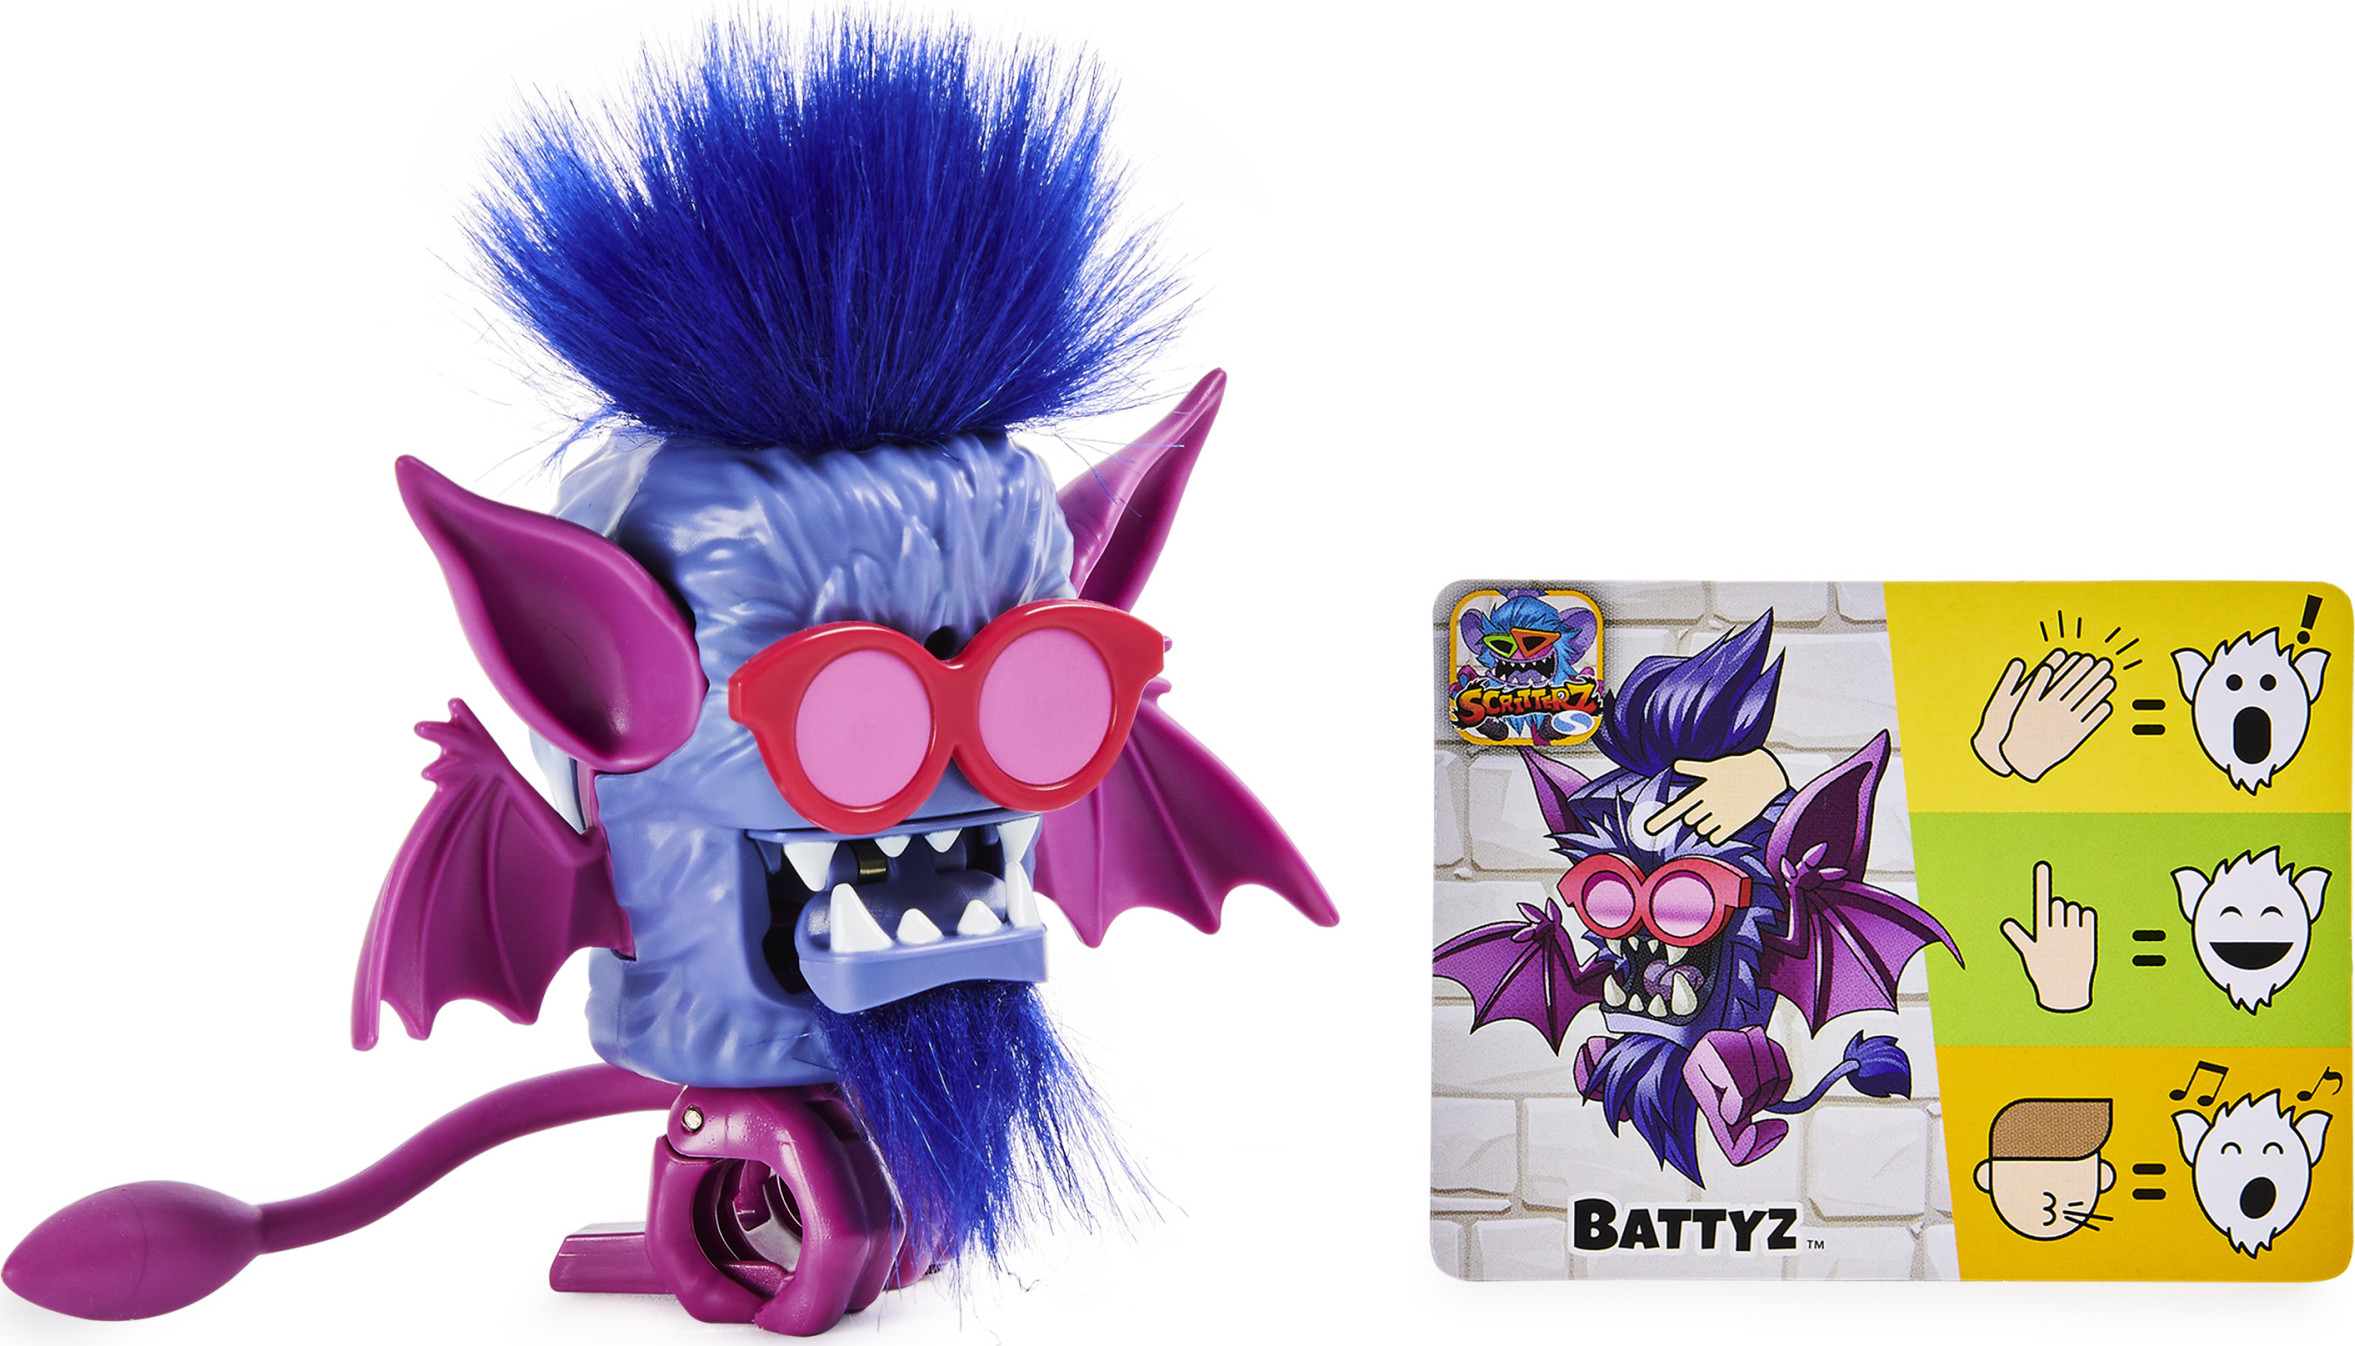 Scritterz, Battyz Interactive Collectible Jungle Creature Toy with Sounds and Movement, for Kids Aged 5 and up - image 3 of 8